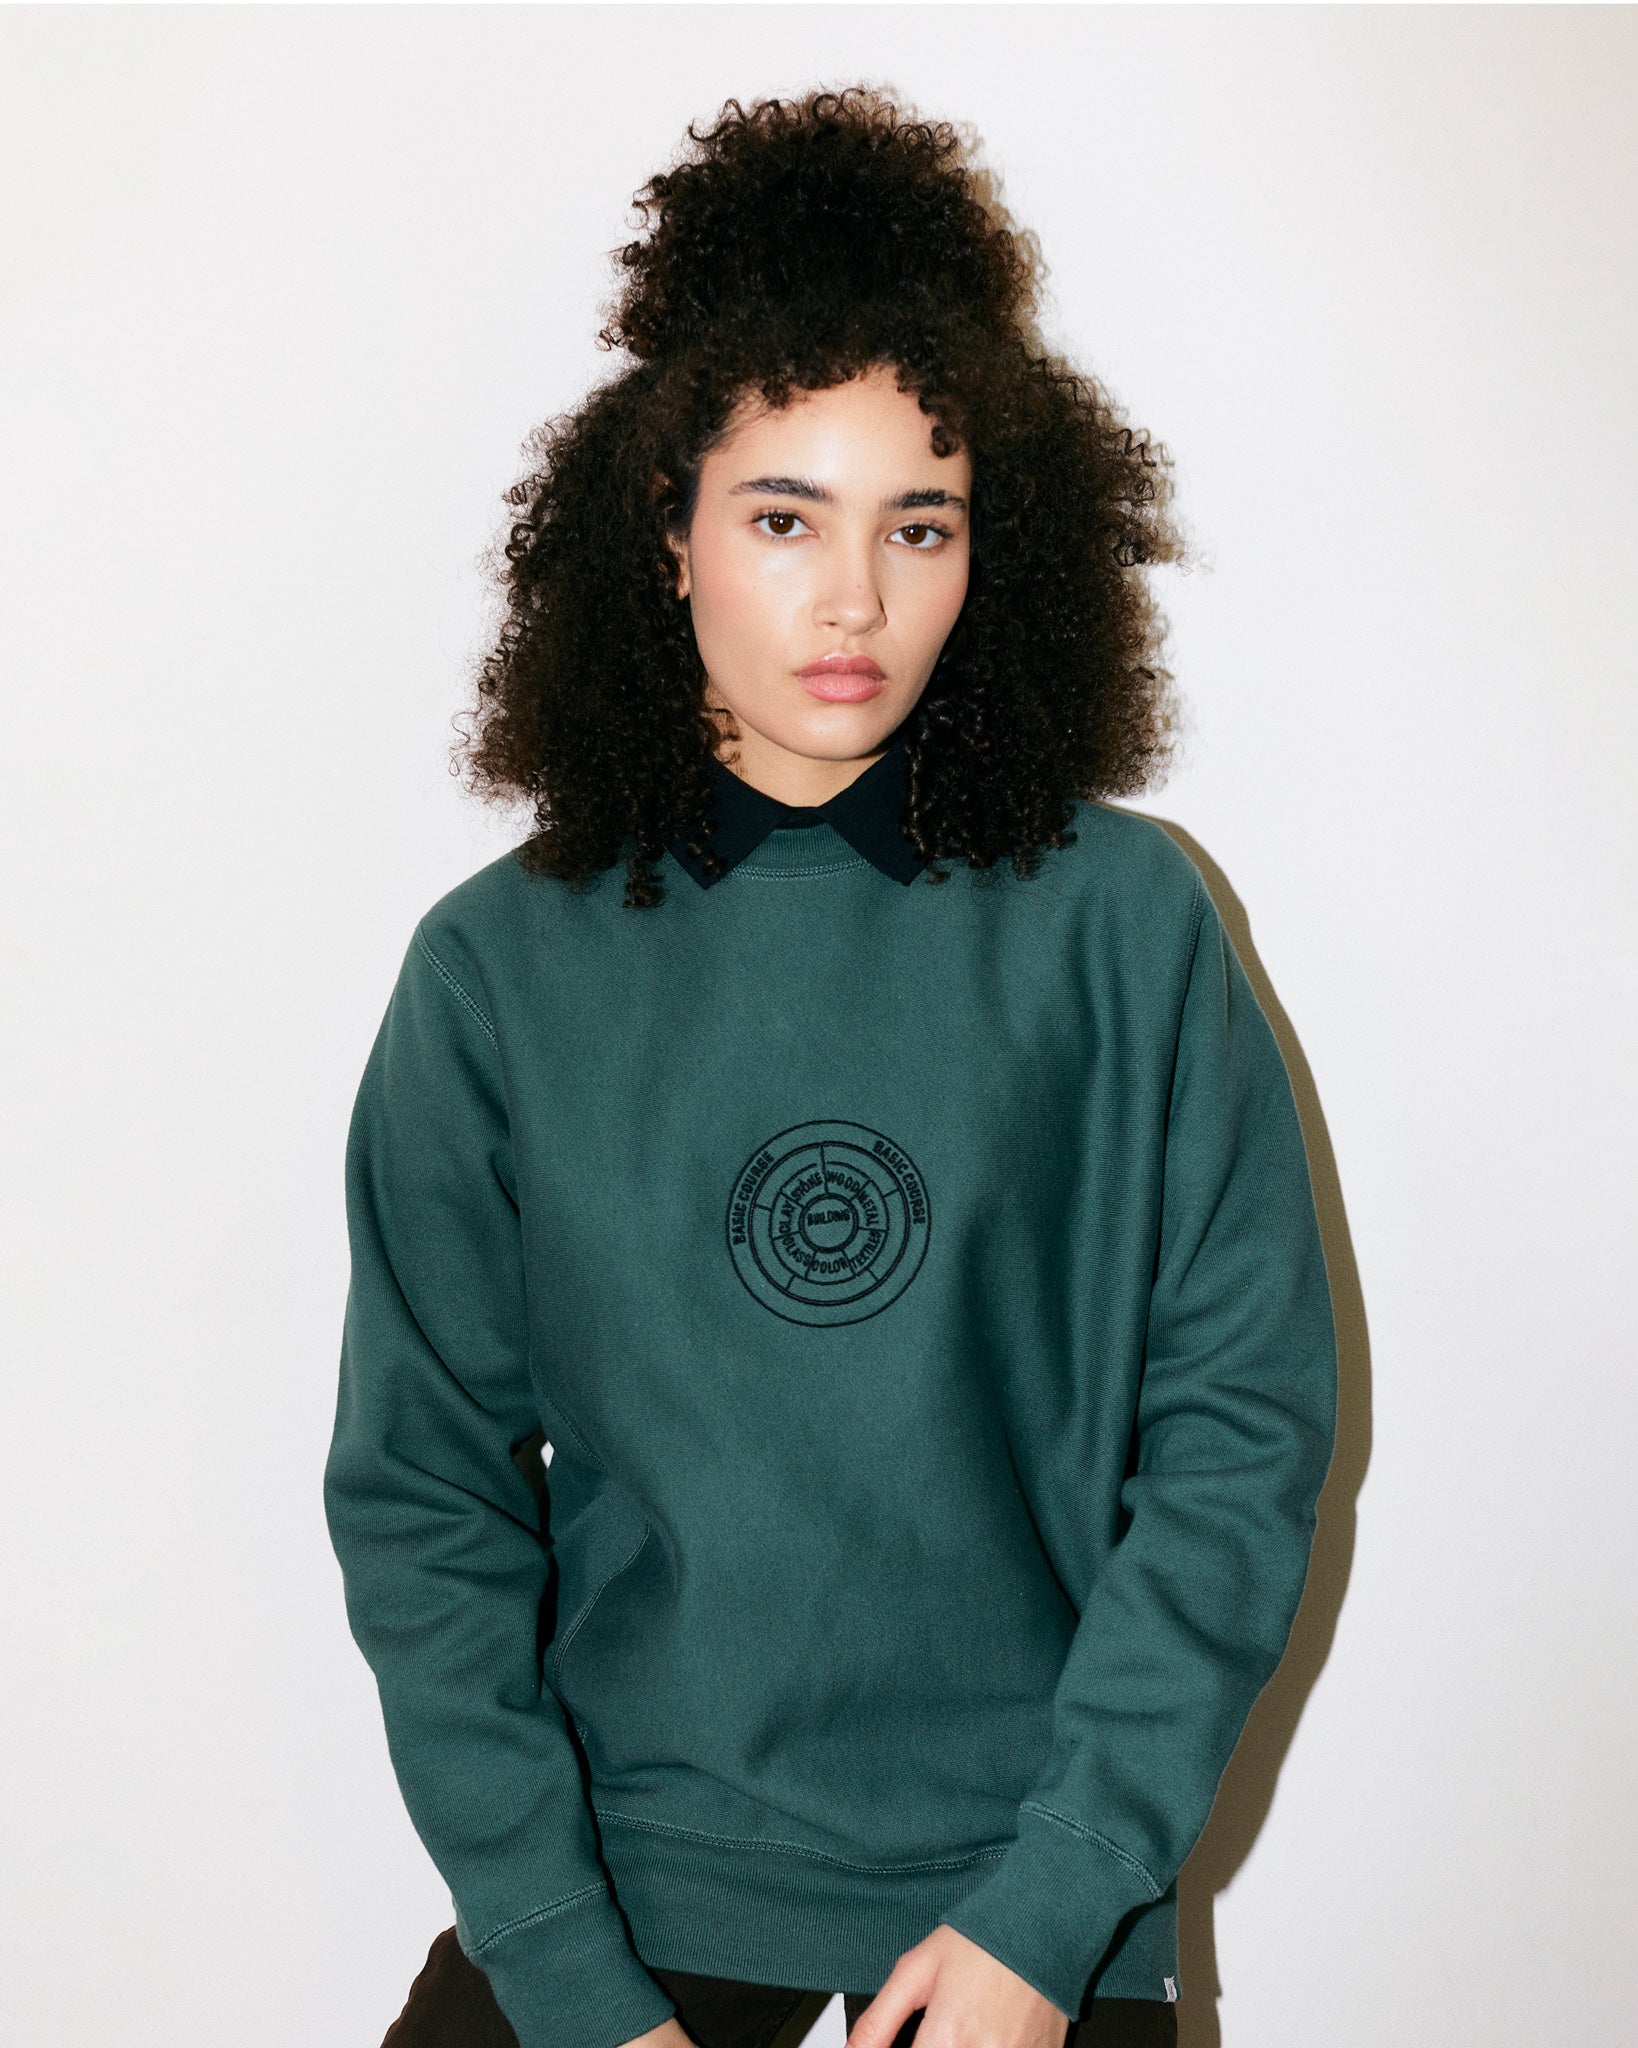 Teodora Marcella wears Green / Viridian Heavyweight Sweatshirt / Crewneck with embroidered print of the Bauhaus School Conceptual Curriculum Diagram and the Official Bauhaus seal on the back. 